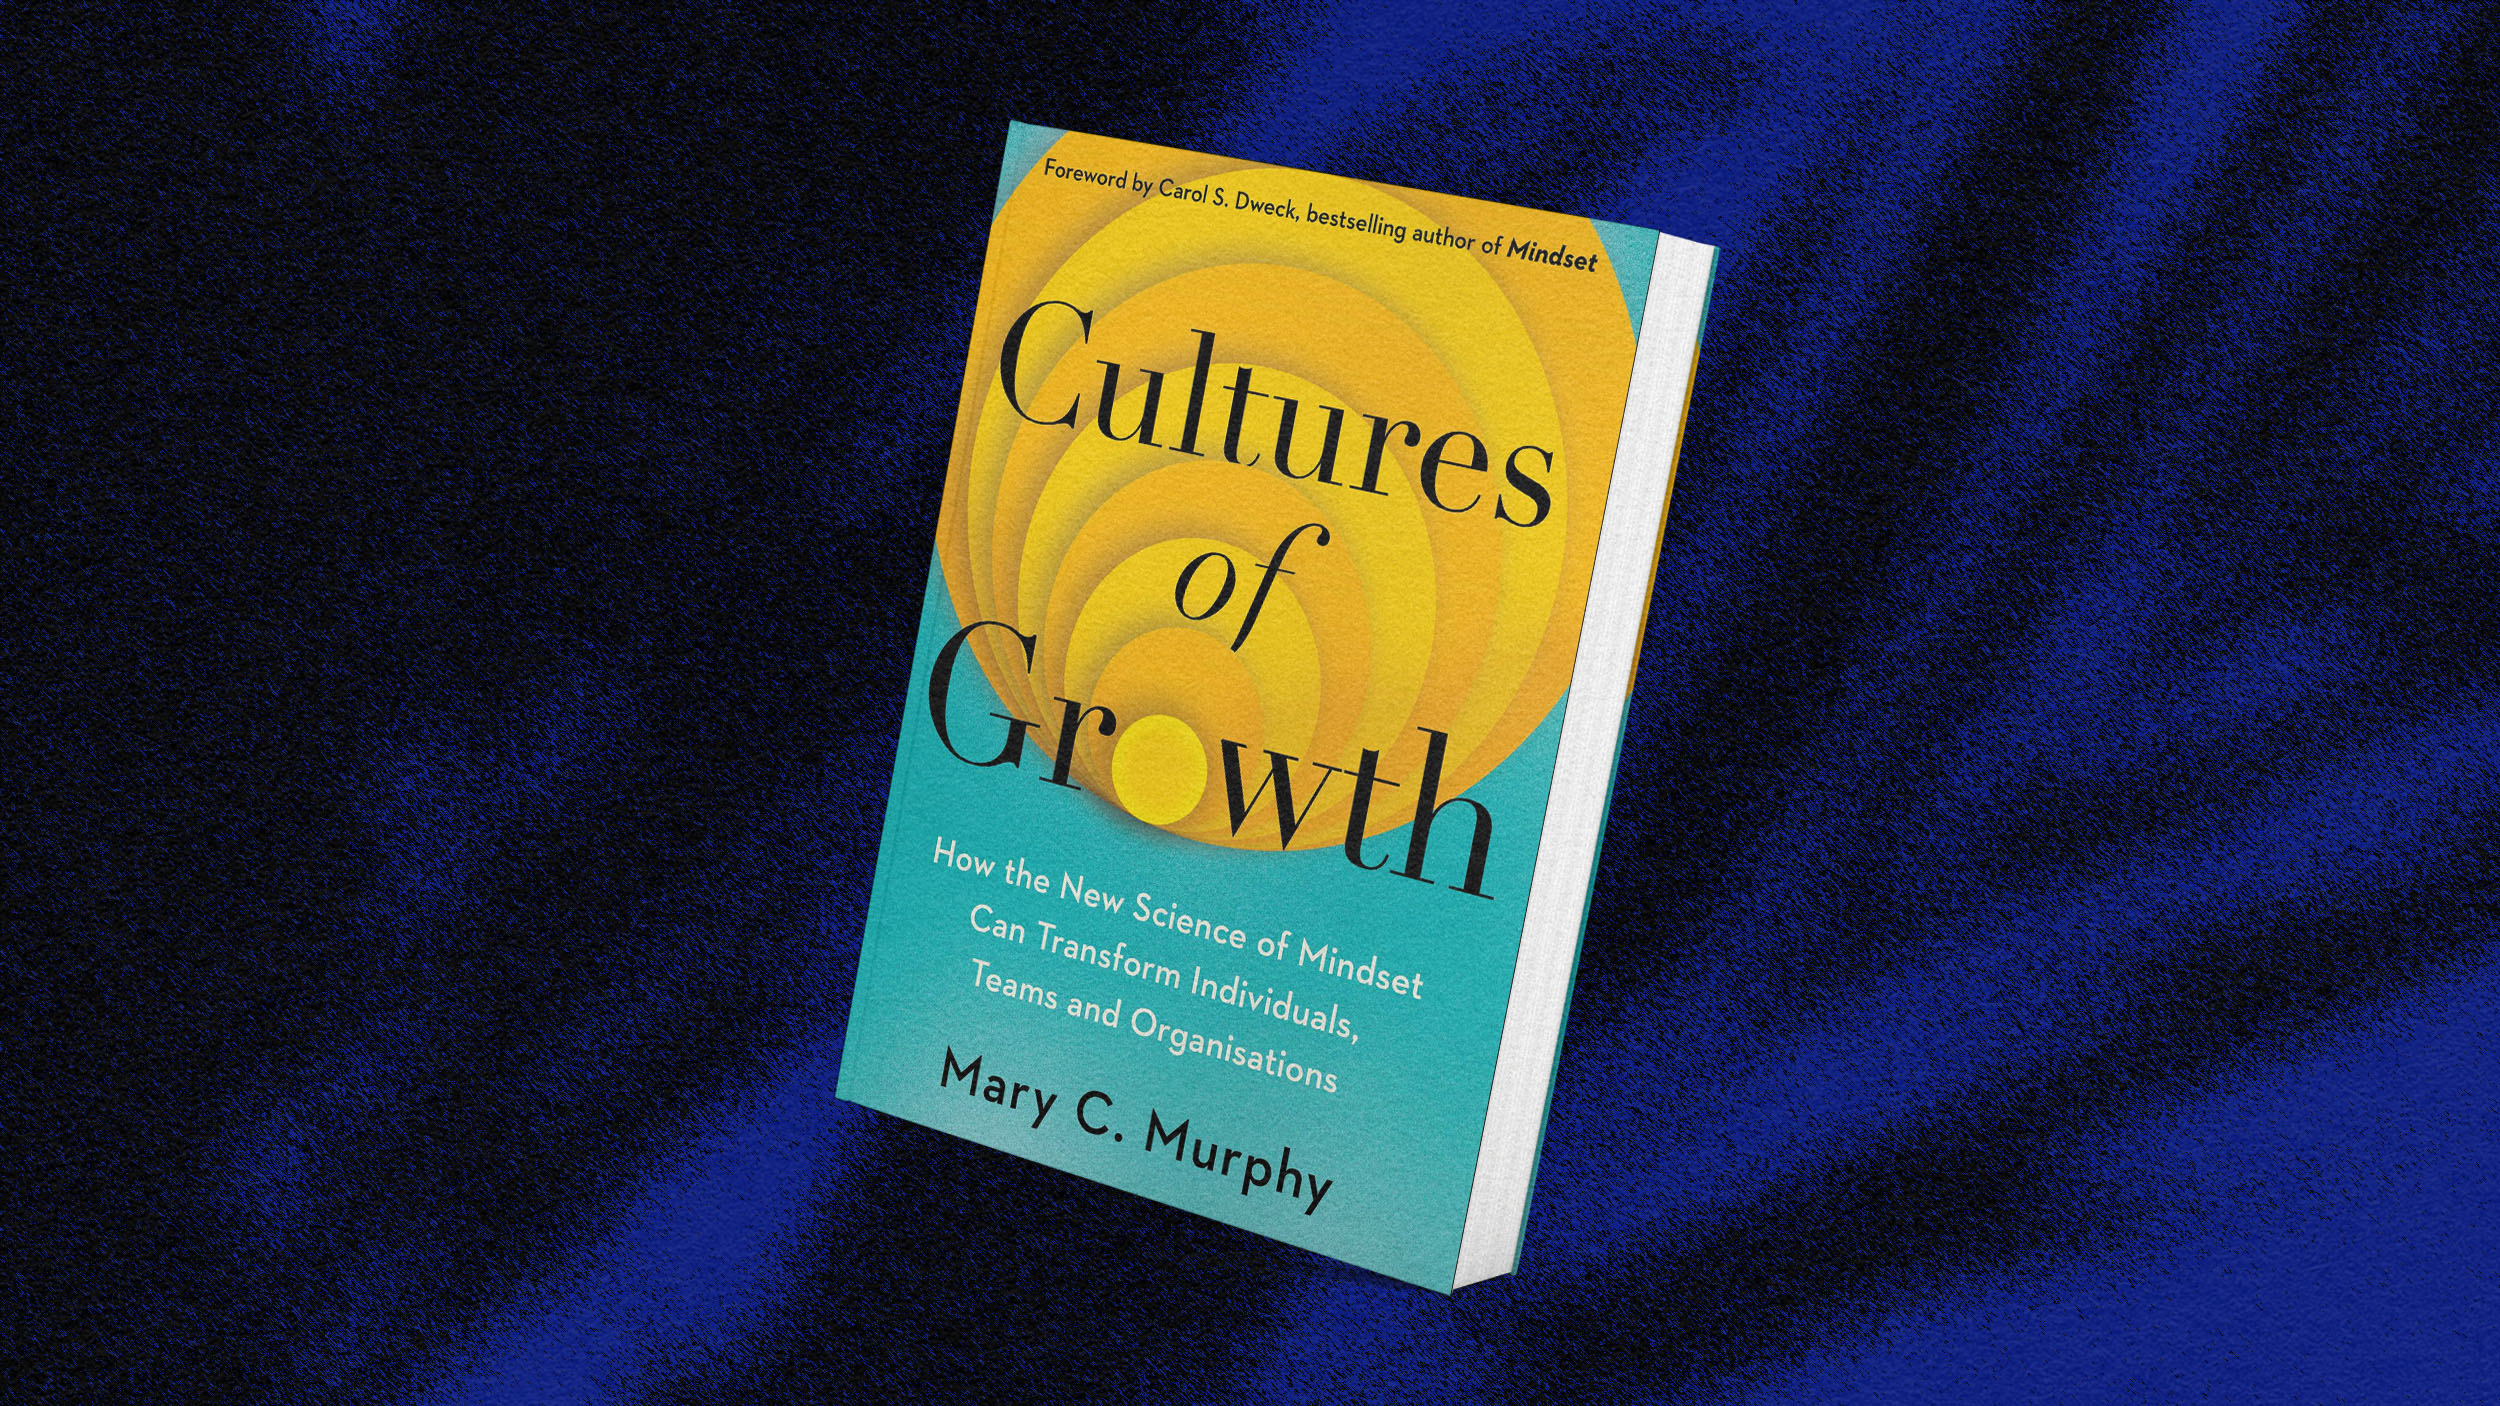 A book titled "Cultures of Growth" by Mary C. Murphy lying on a dark blue fabric surface.